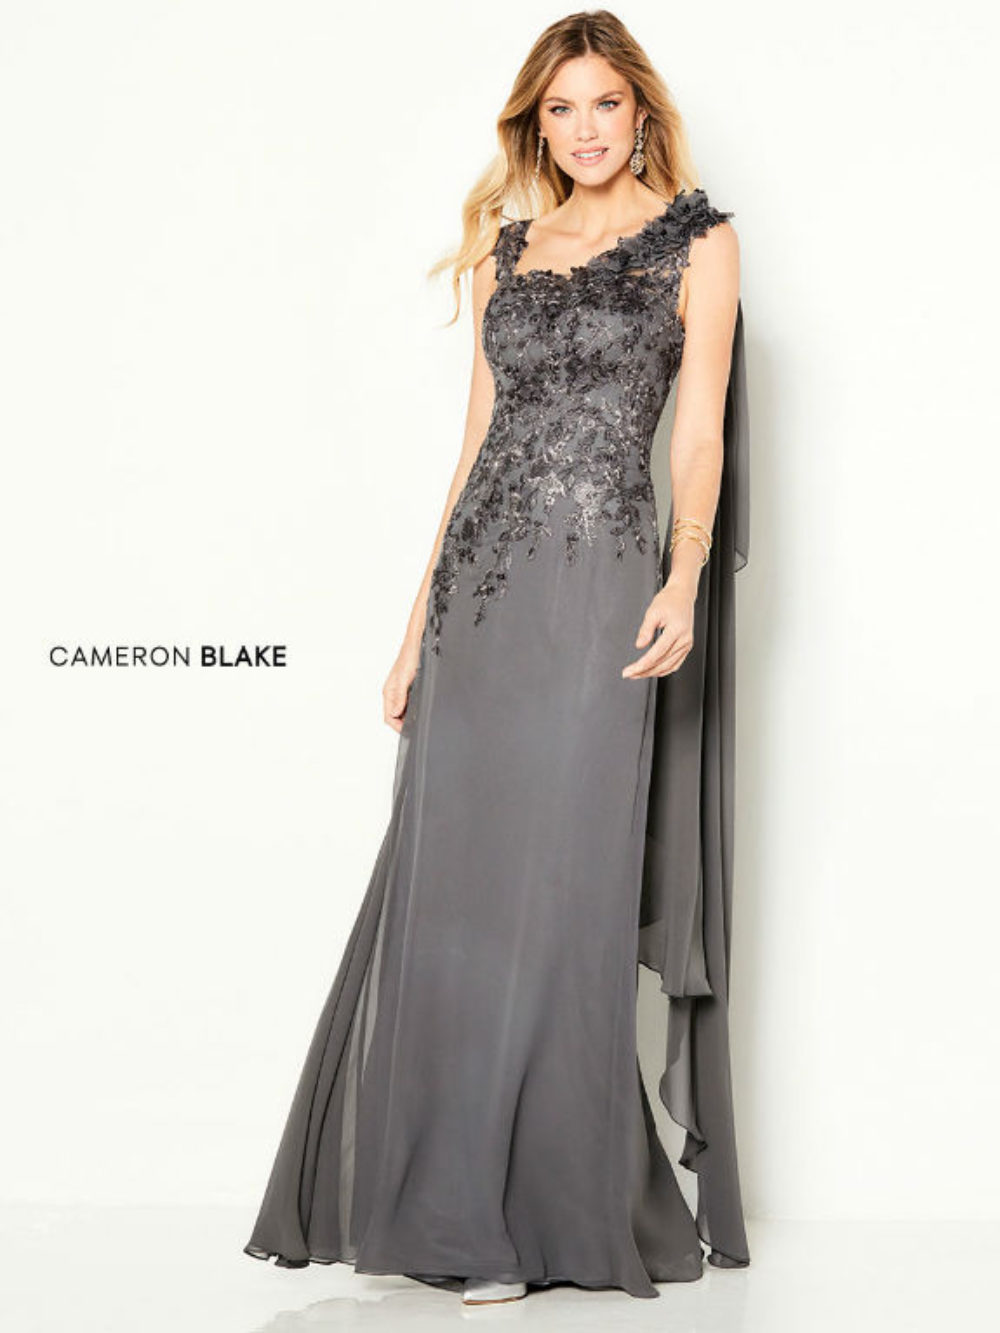 cameron blake mother of the bride dresses near me